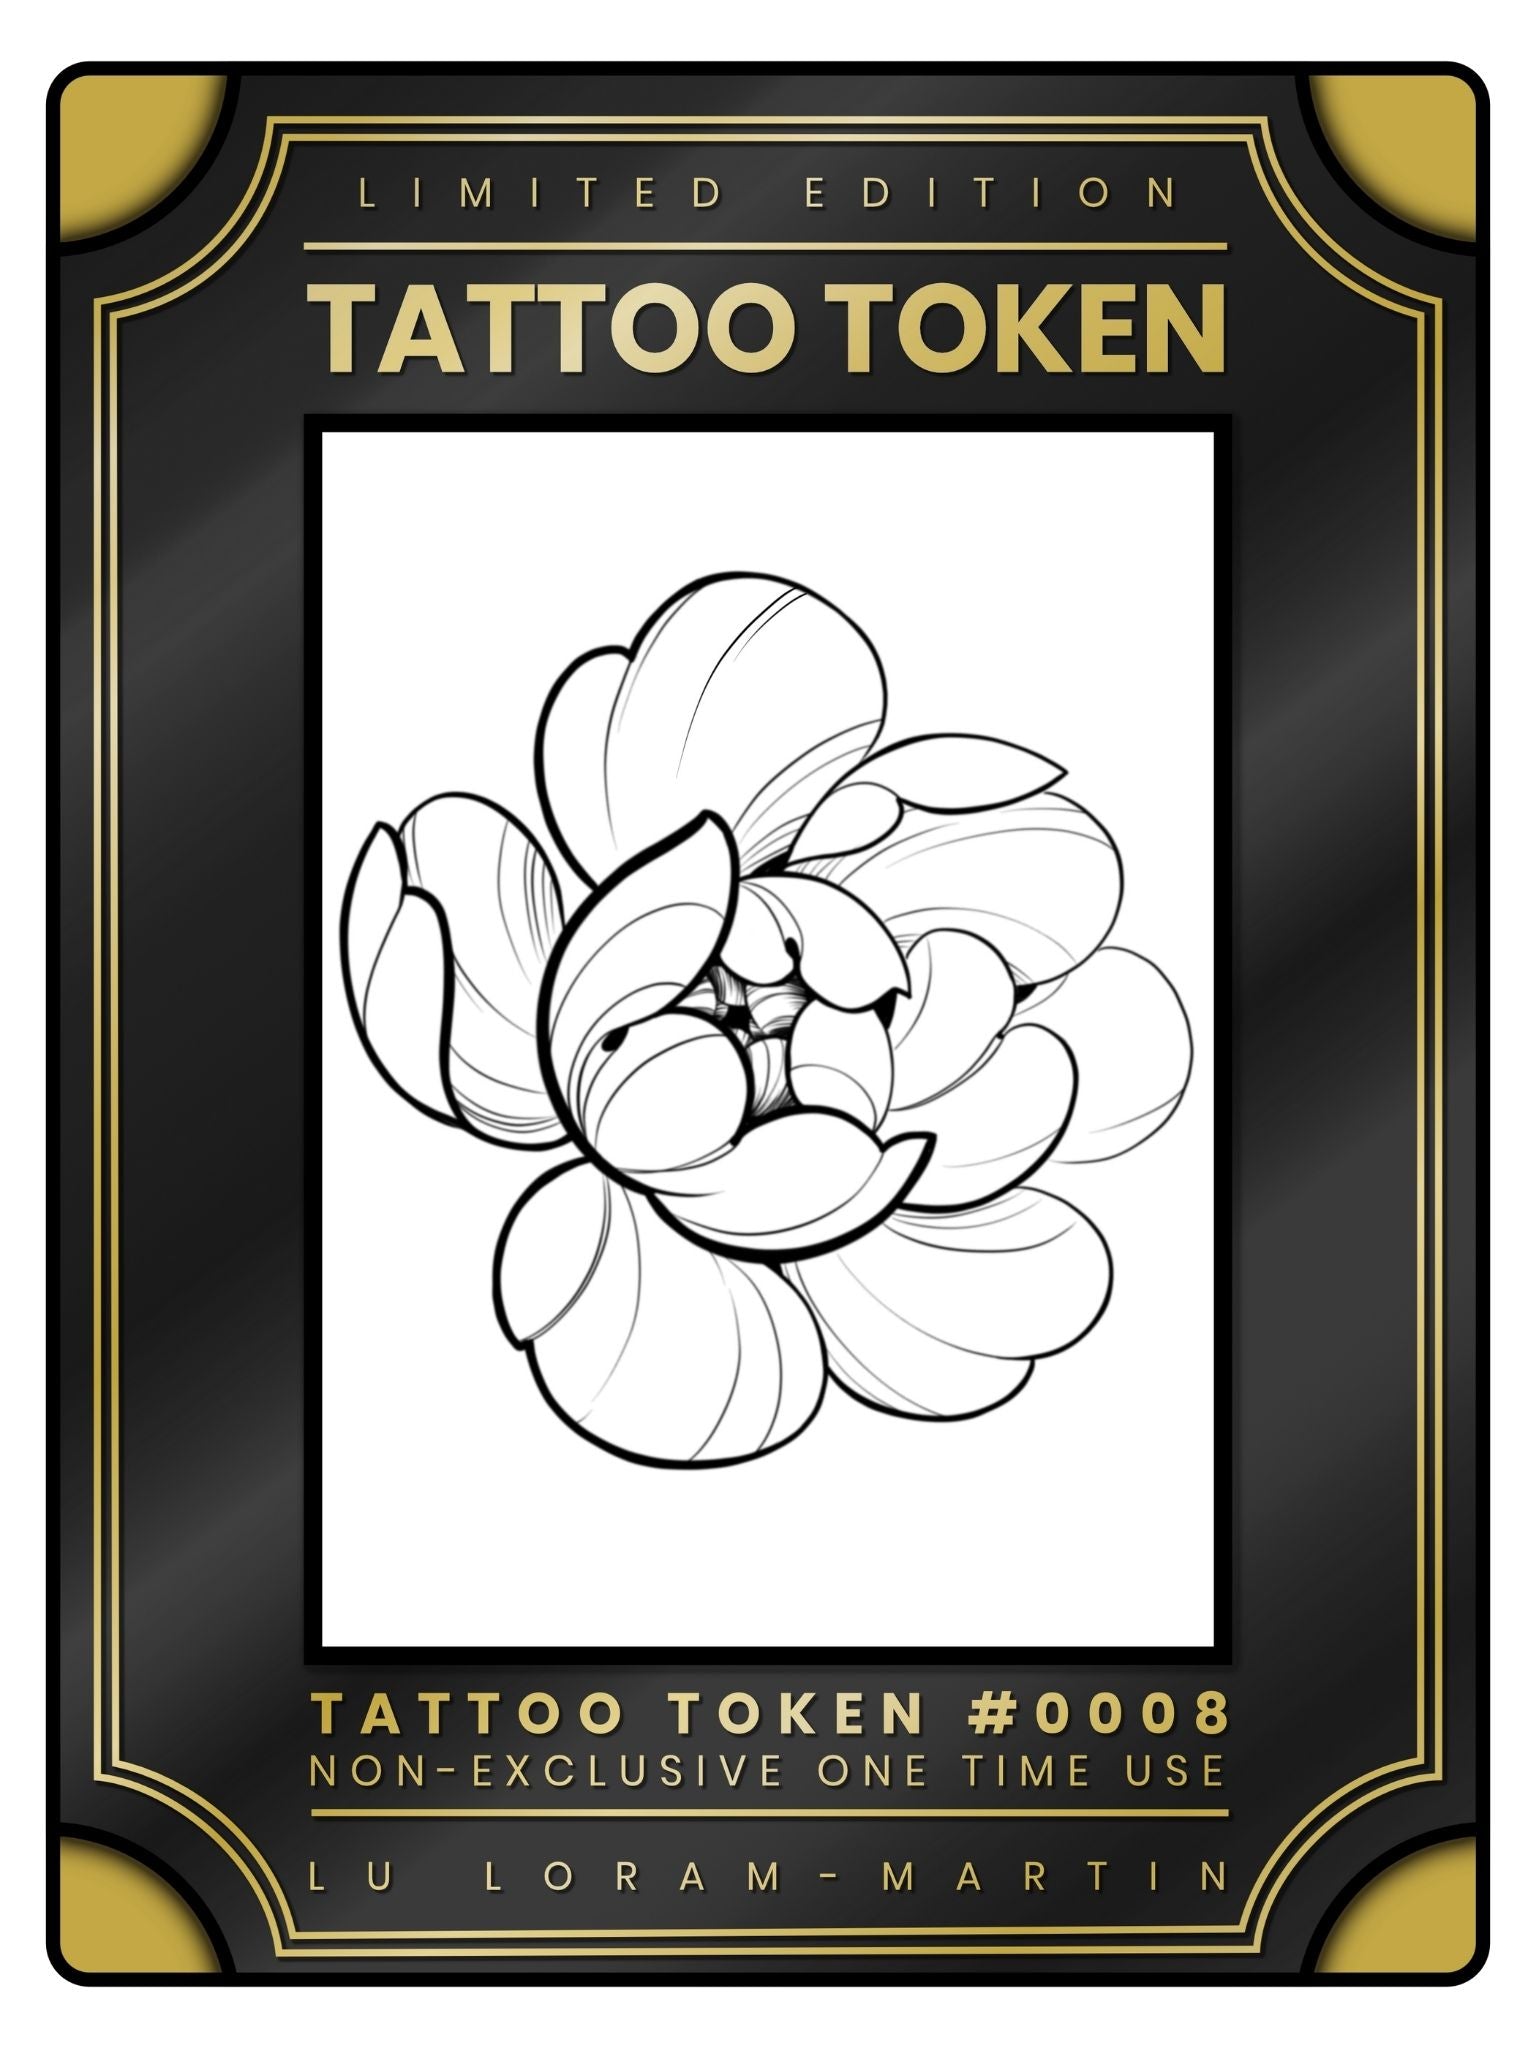 Simple peony floral tattoo token design in black line work and shading, illustrated by female floral tattoo artist Lu Loram Martin, Toronto, Canada